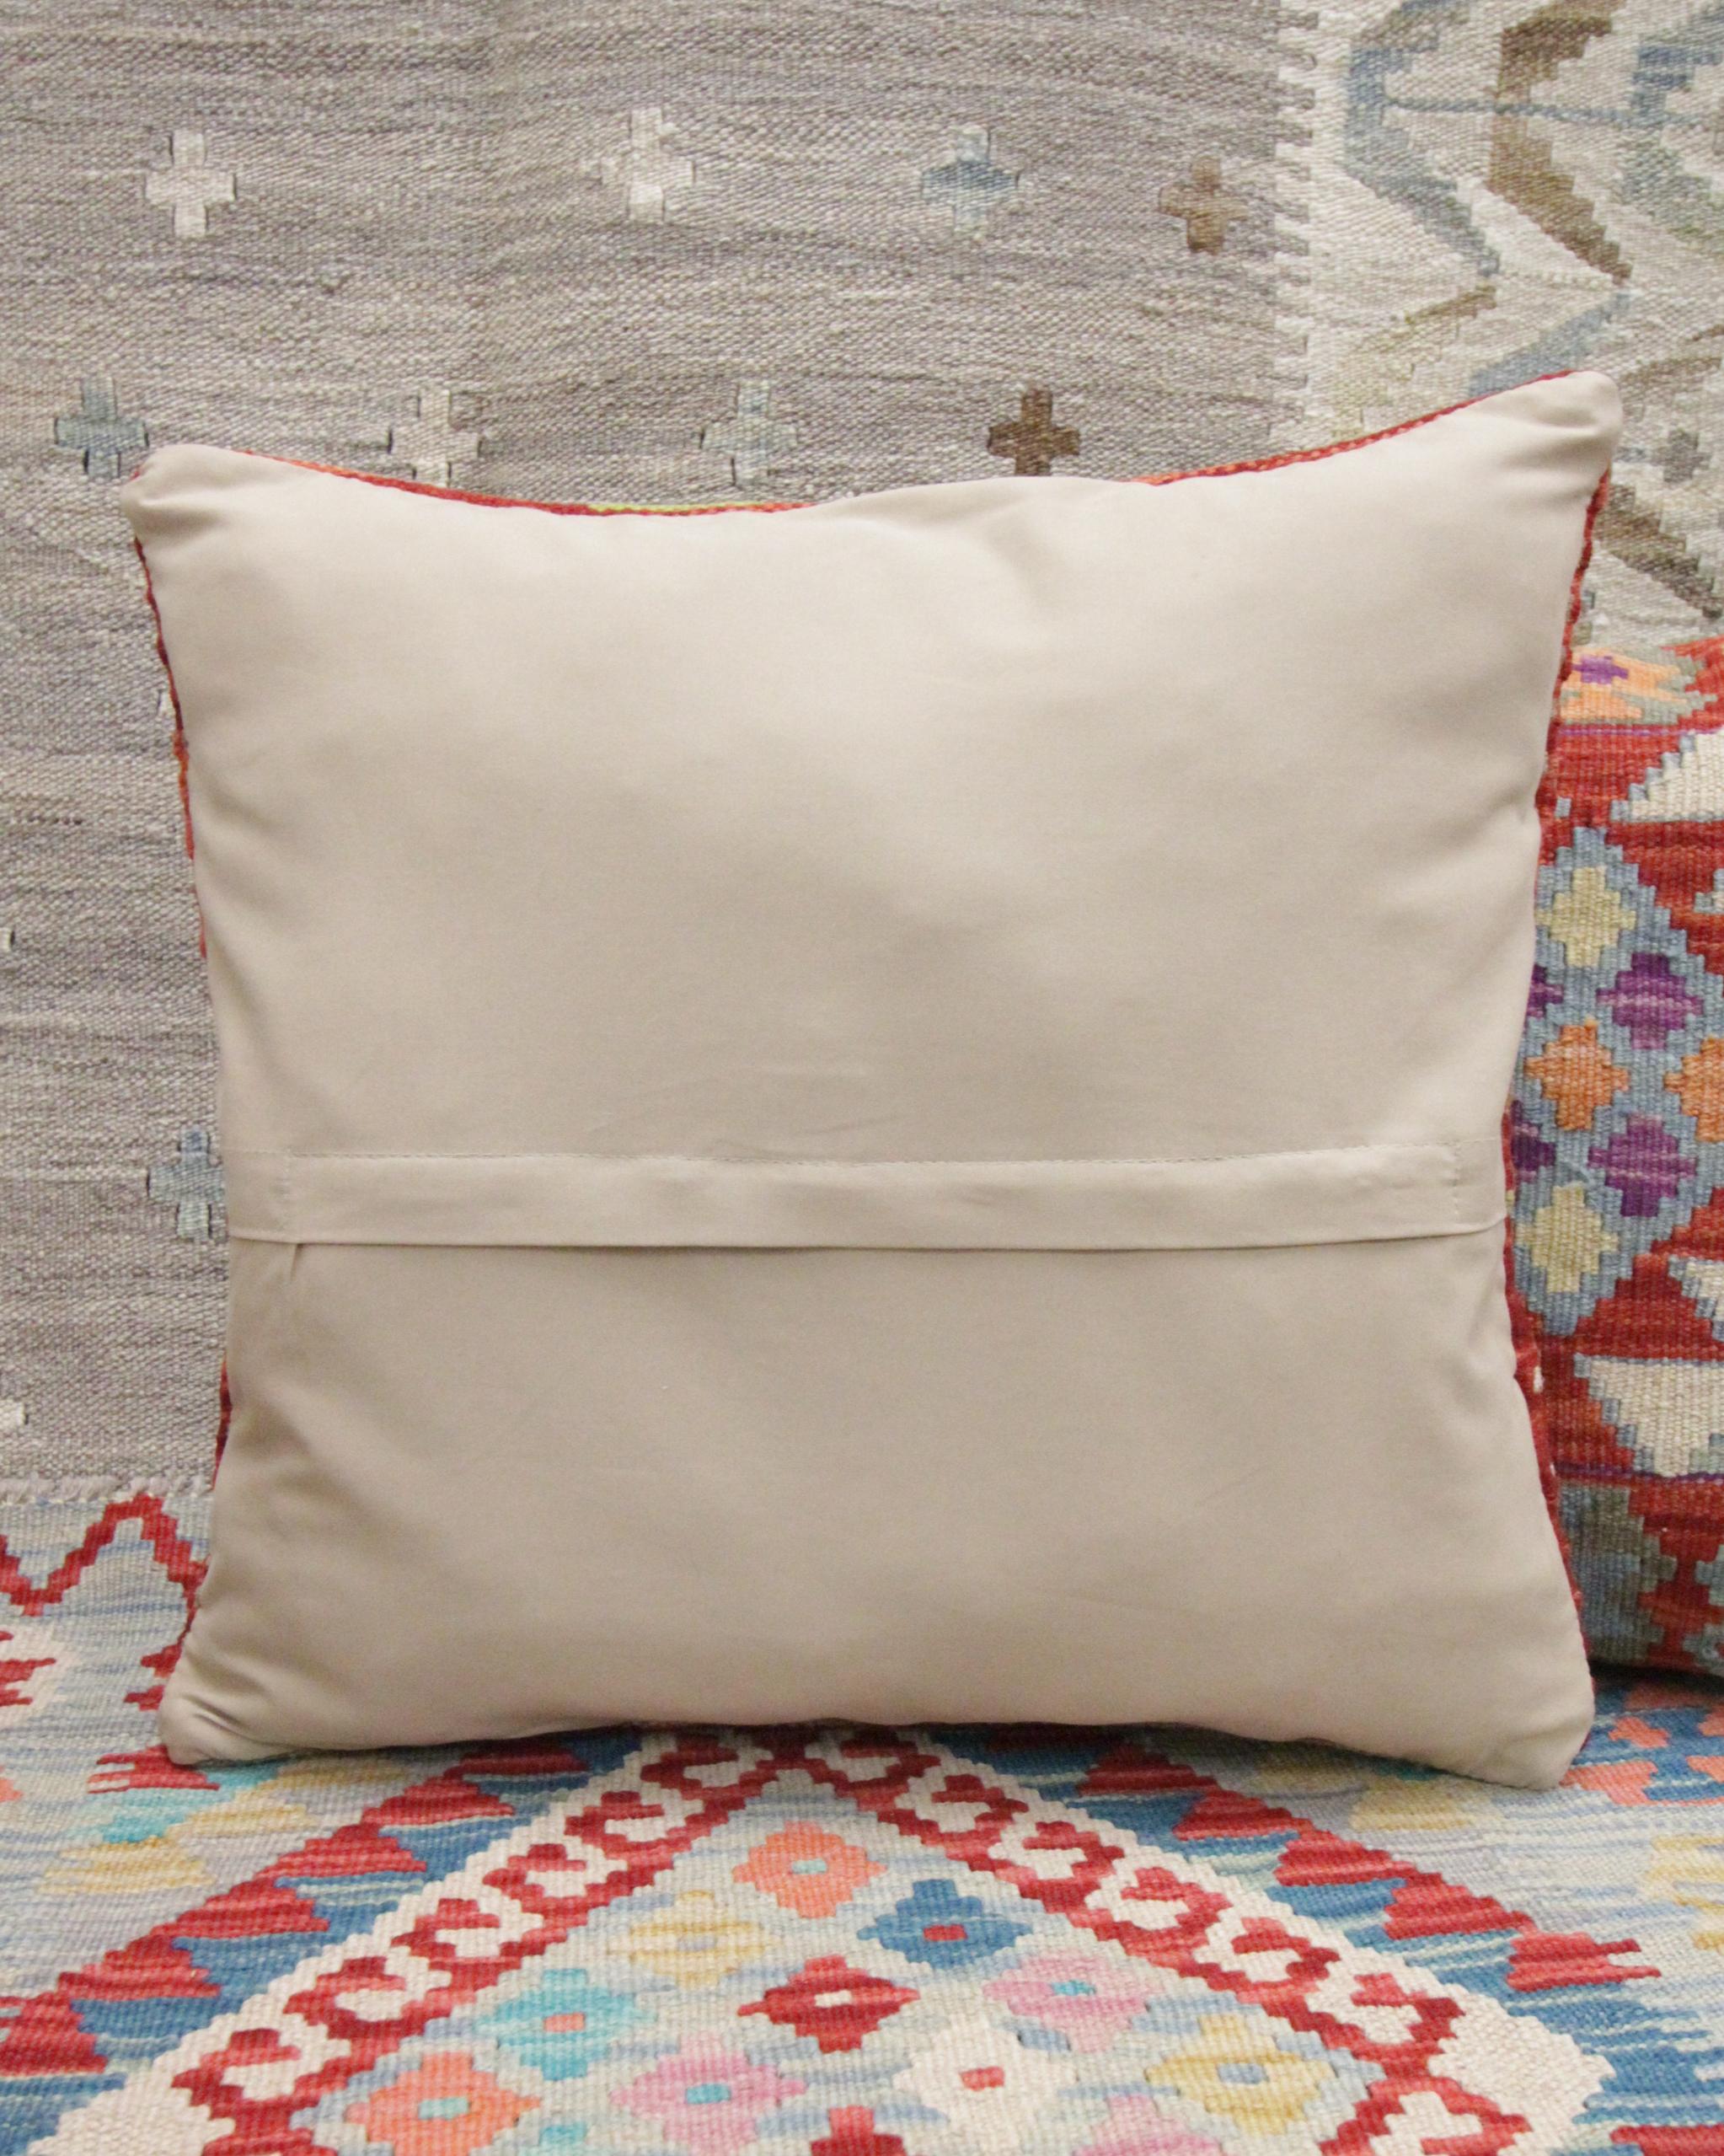 Contemporary Red Wool Kilim Cushion Cover Handwoven Geometric Scatter Pillow